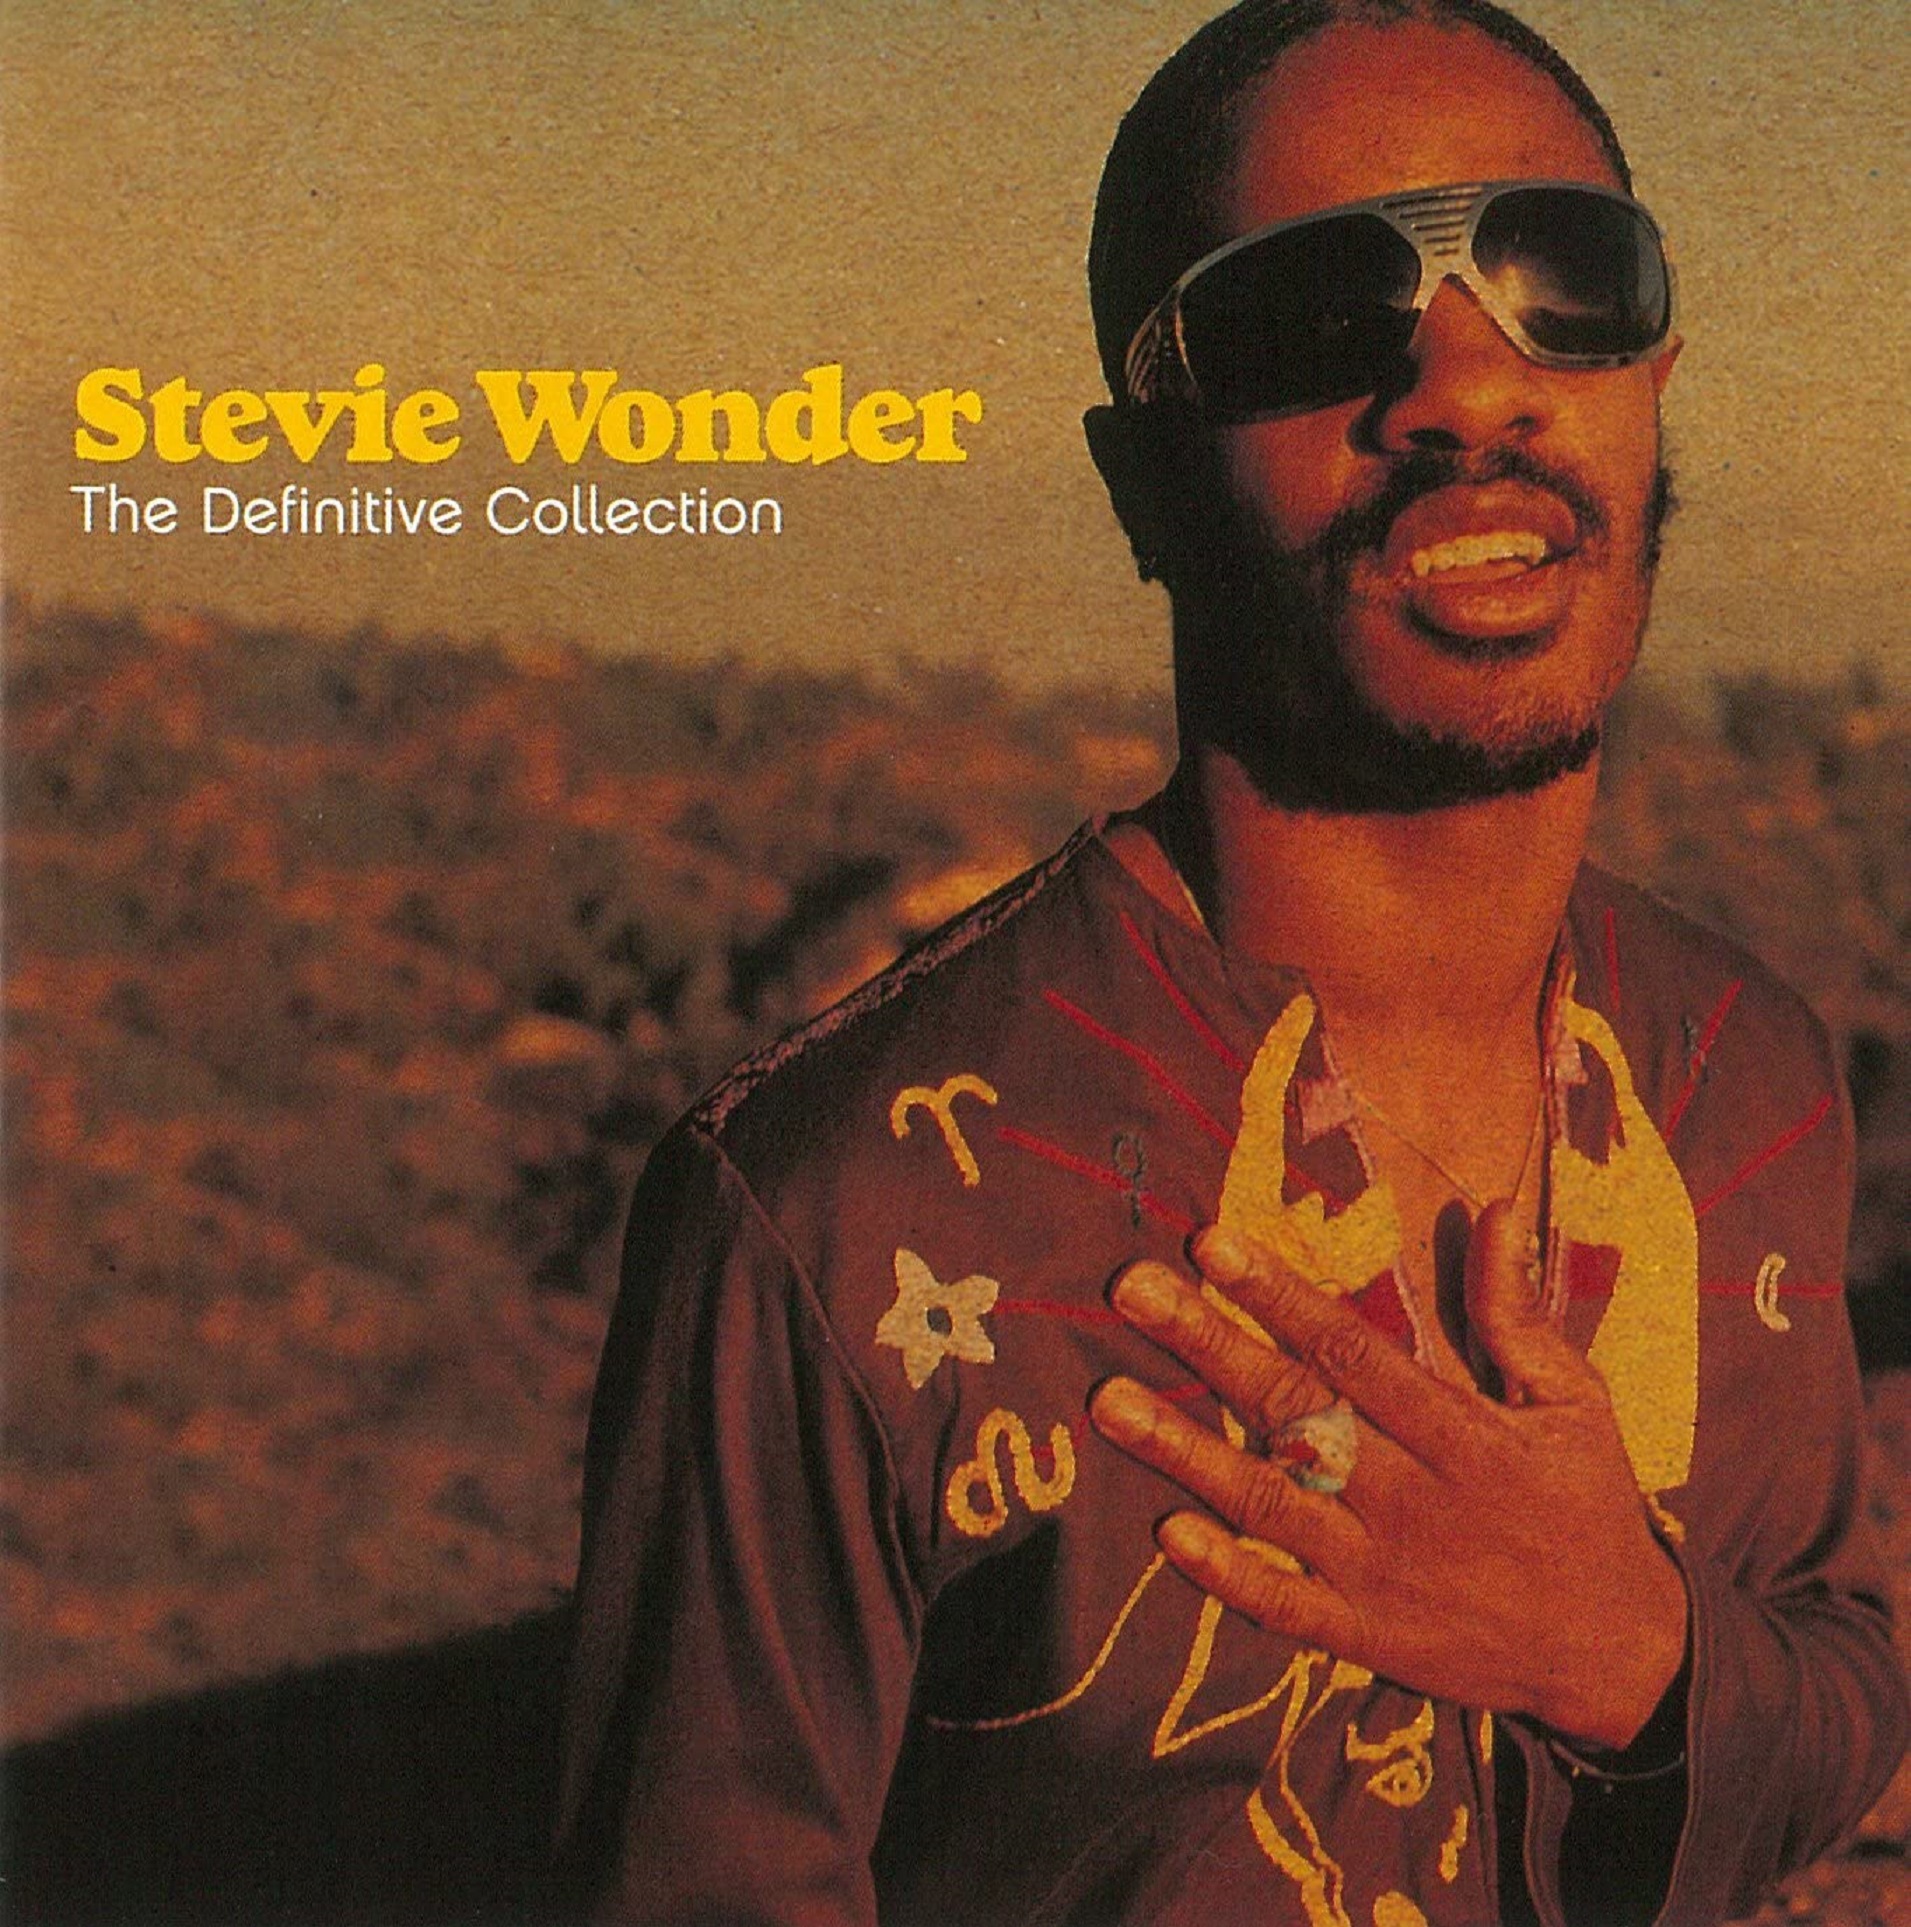 Celebrating Stevie Wonder: A Musical Journey from Motown Prodigy to Global Icon